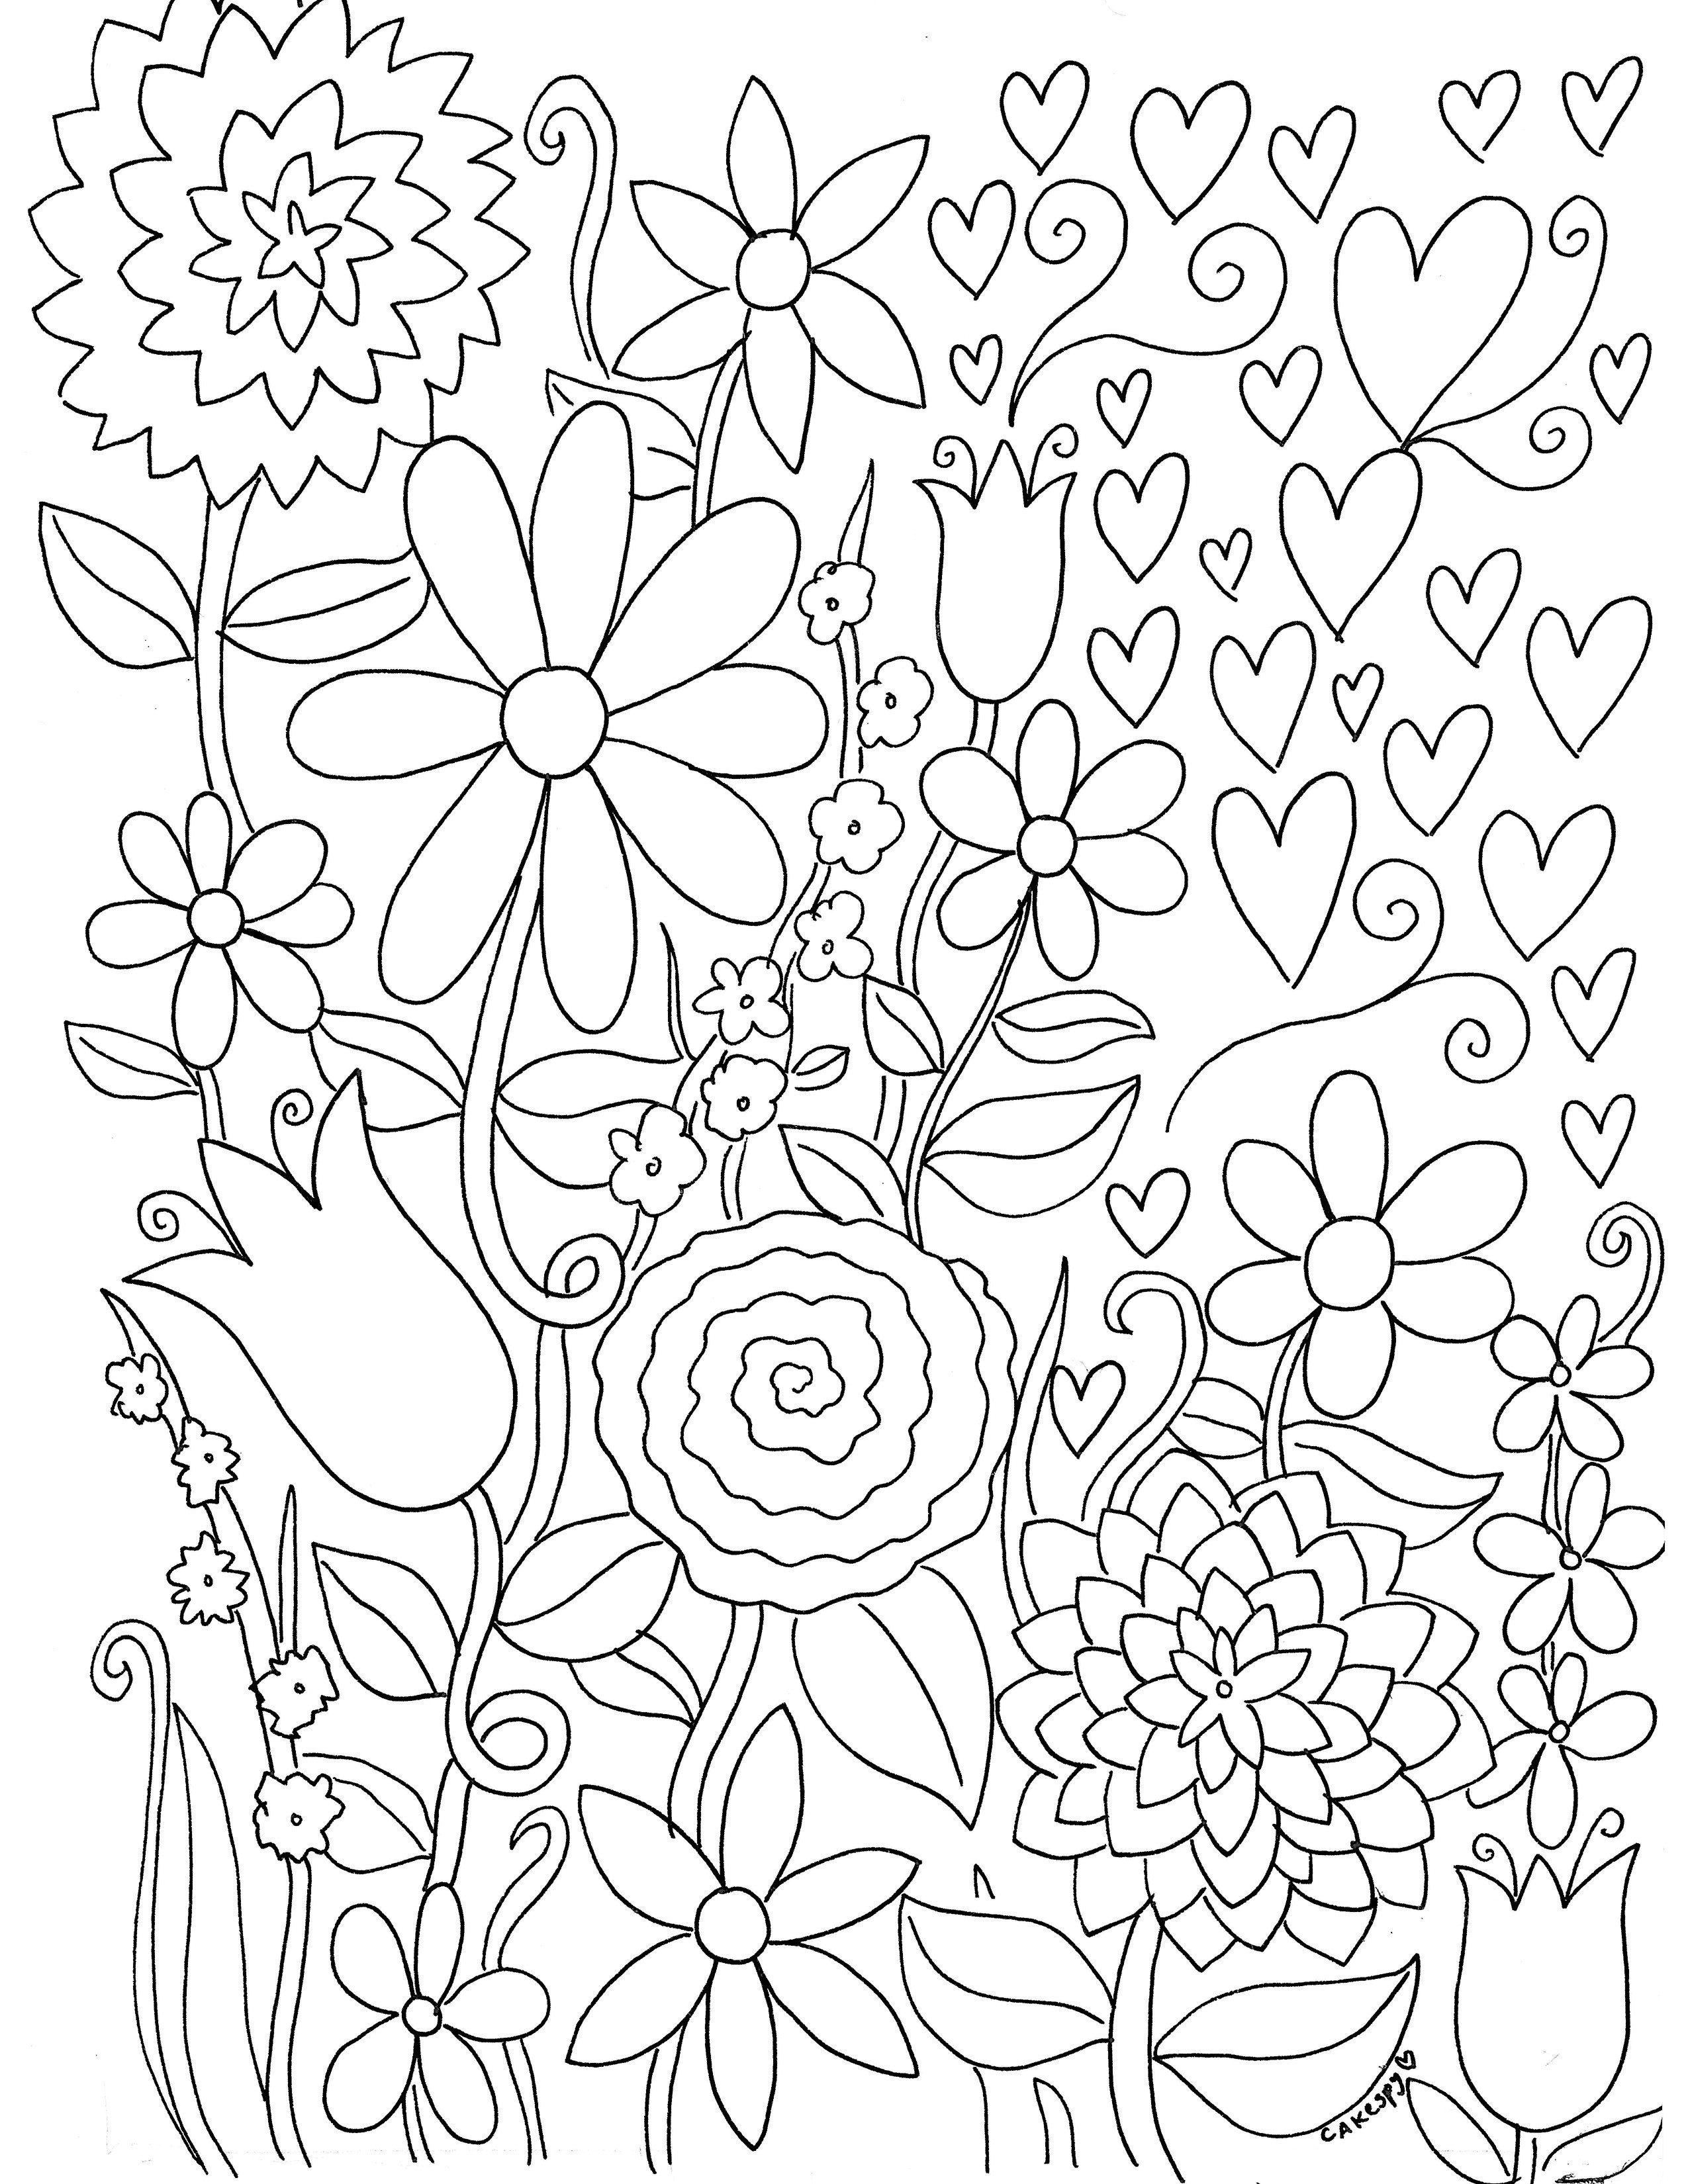 Coloring Pages For Adults Online
 Free Coloring Book Pages for Adults